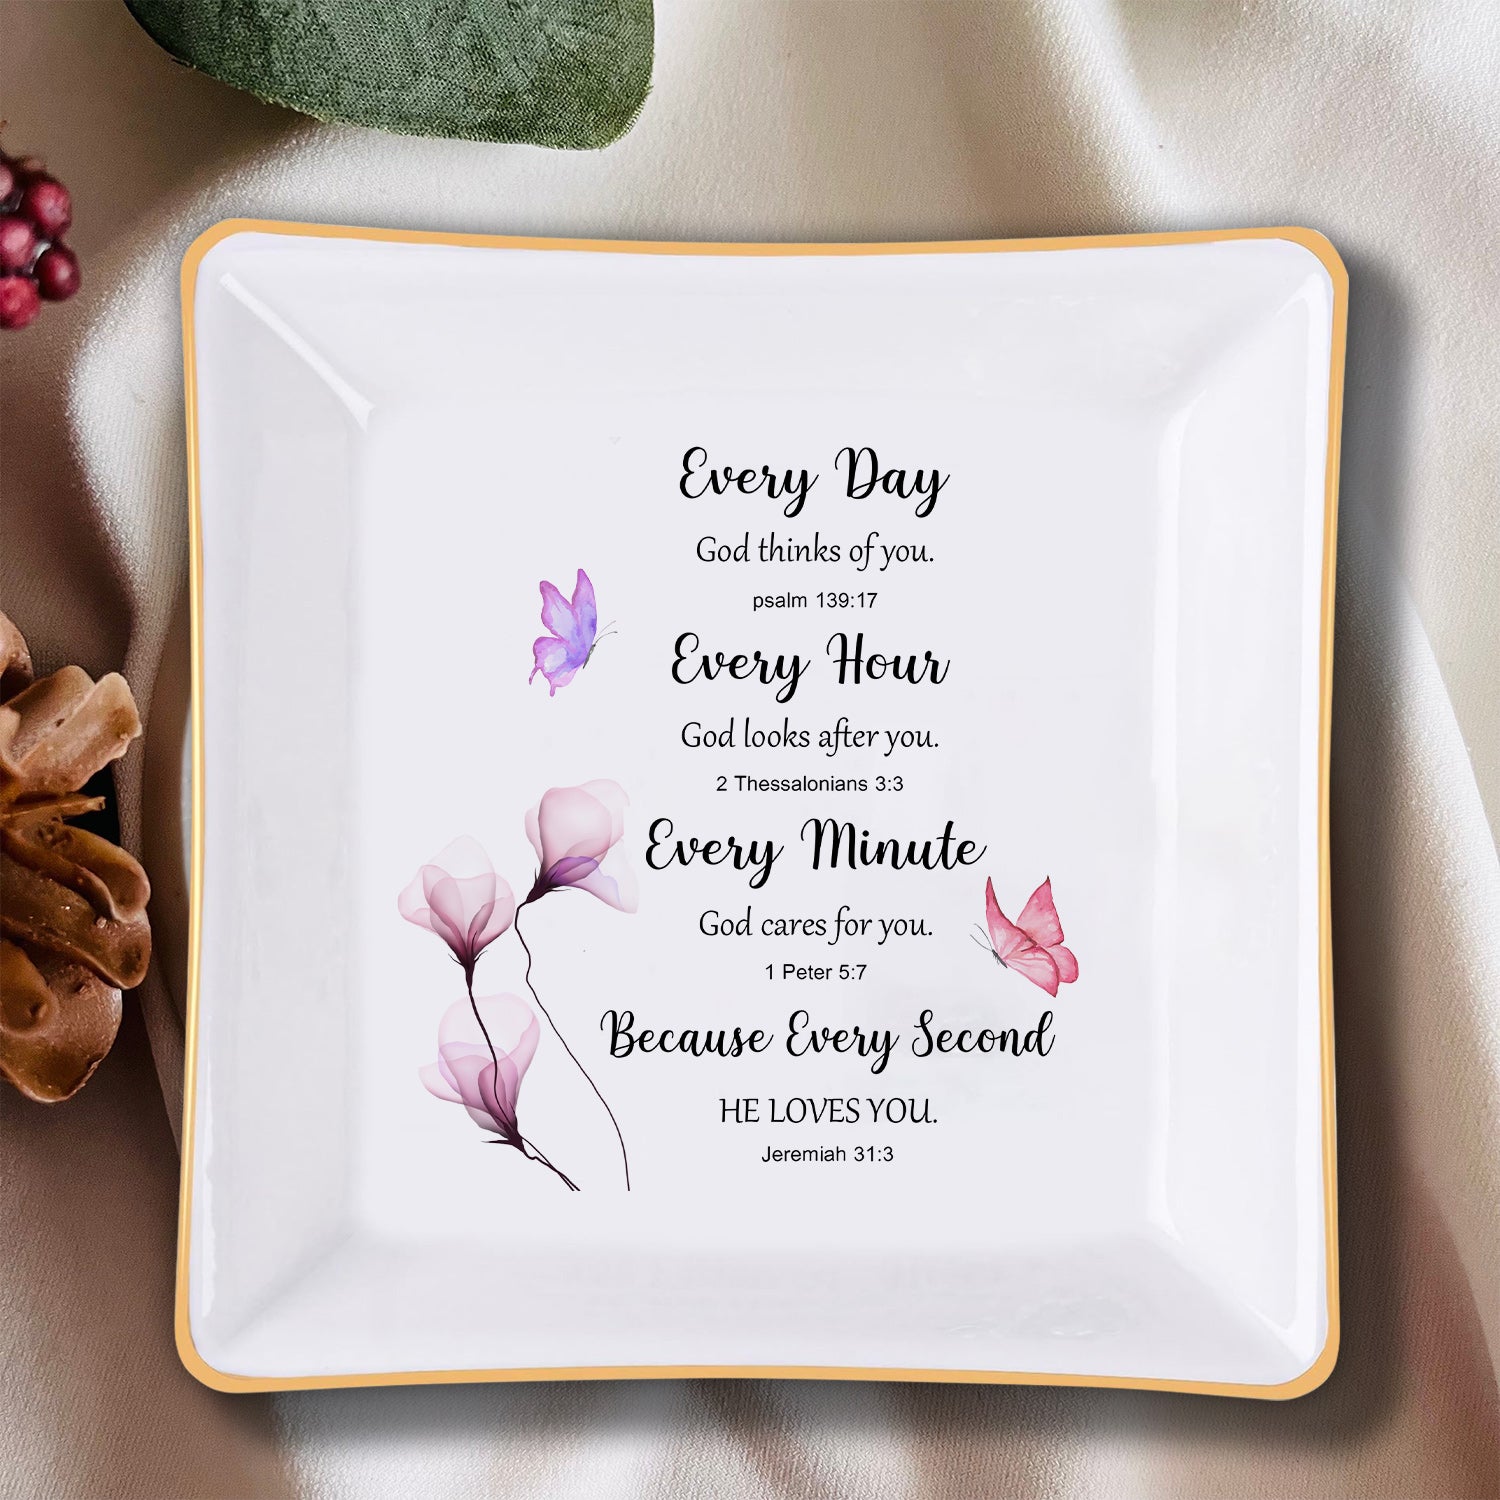 Every Day Every Hour Every Minute Christian Gift Inspirational Religious Gift Ceramic Ring Dish